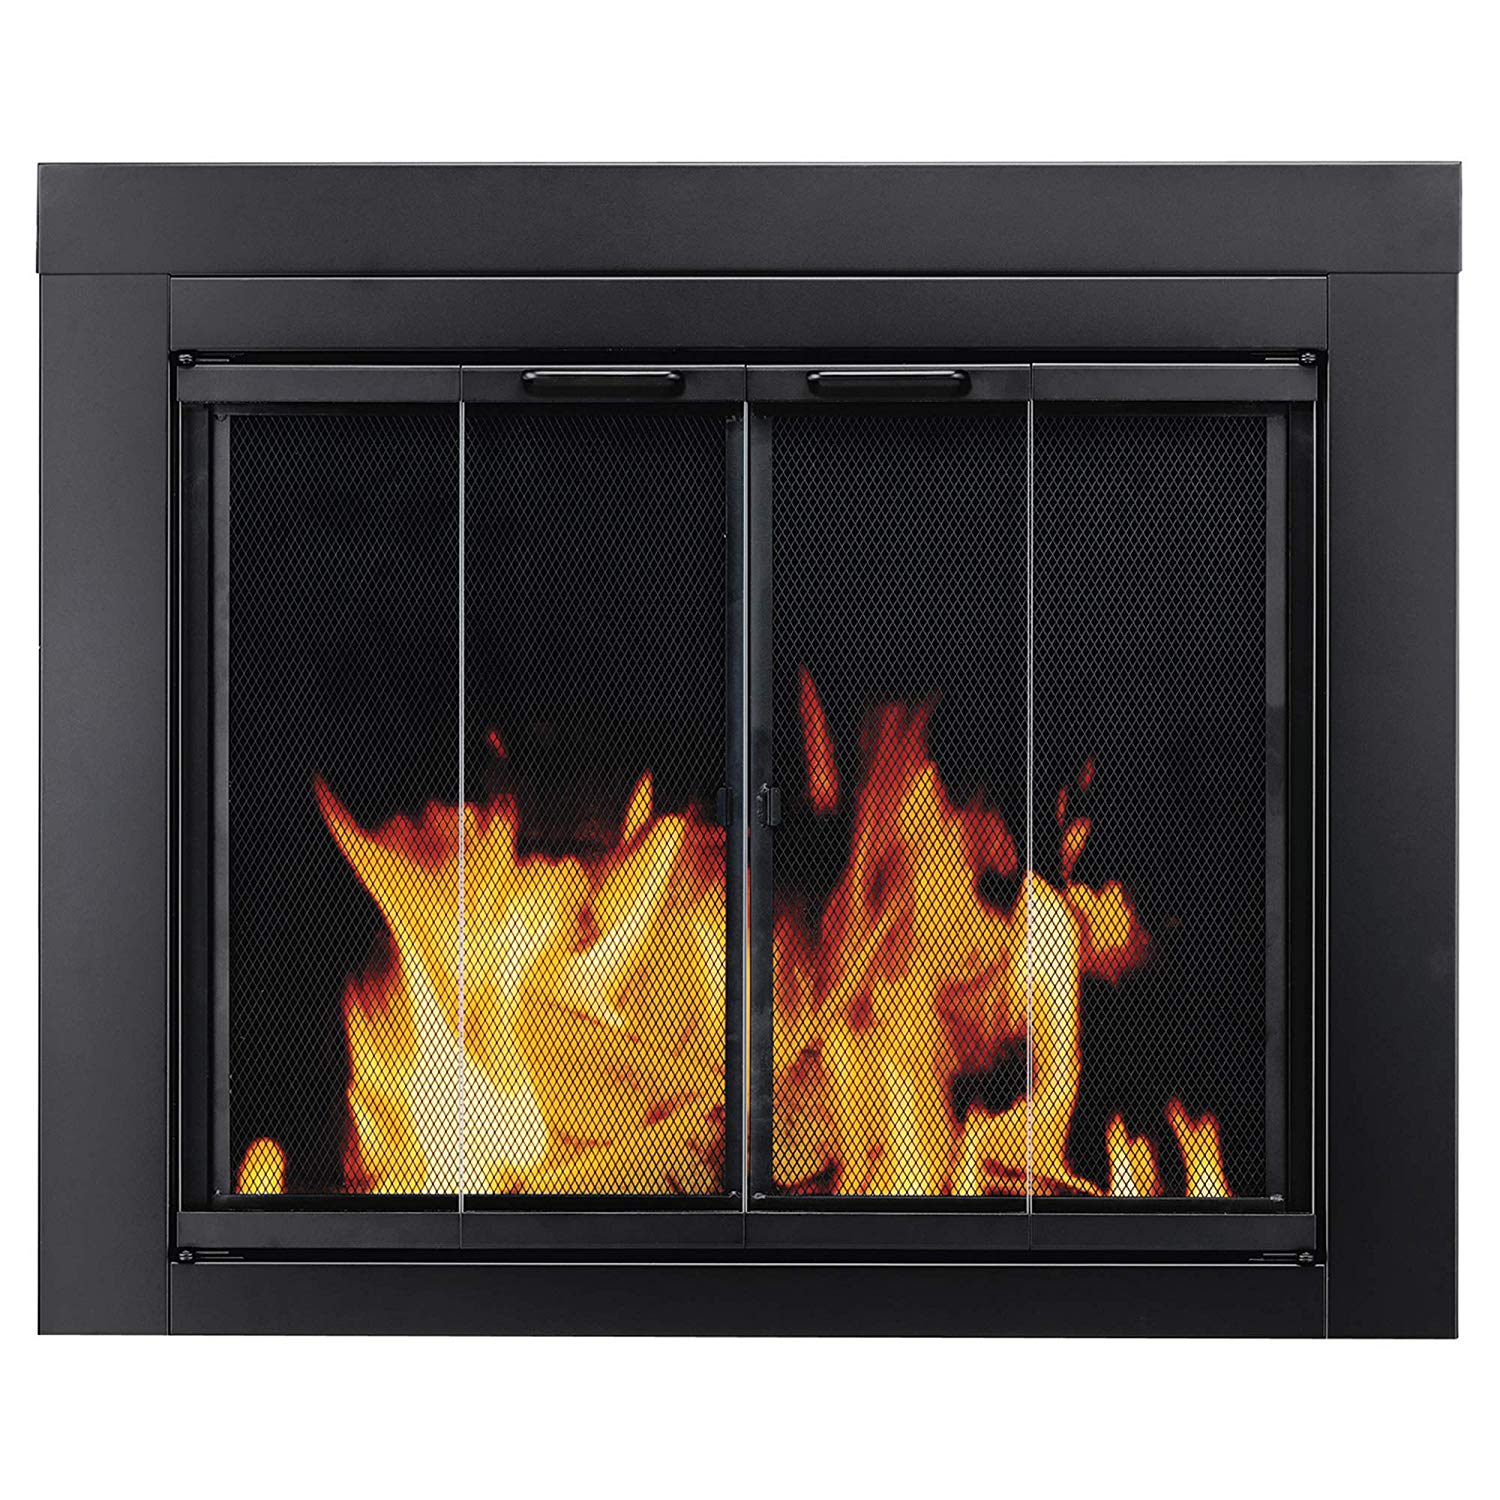 Fireplace Hearth Extension Elegant Pleasant Hearth at 1000 ascot Fireplace Glass Door Black Small